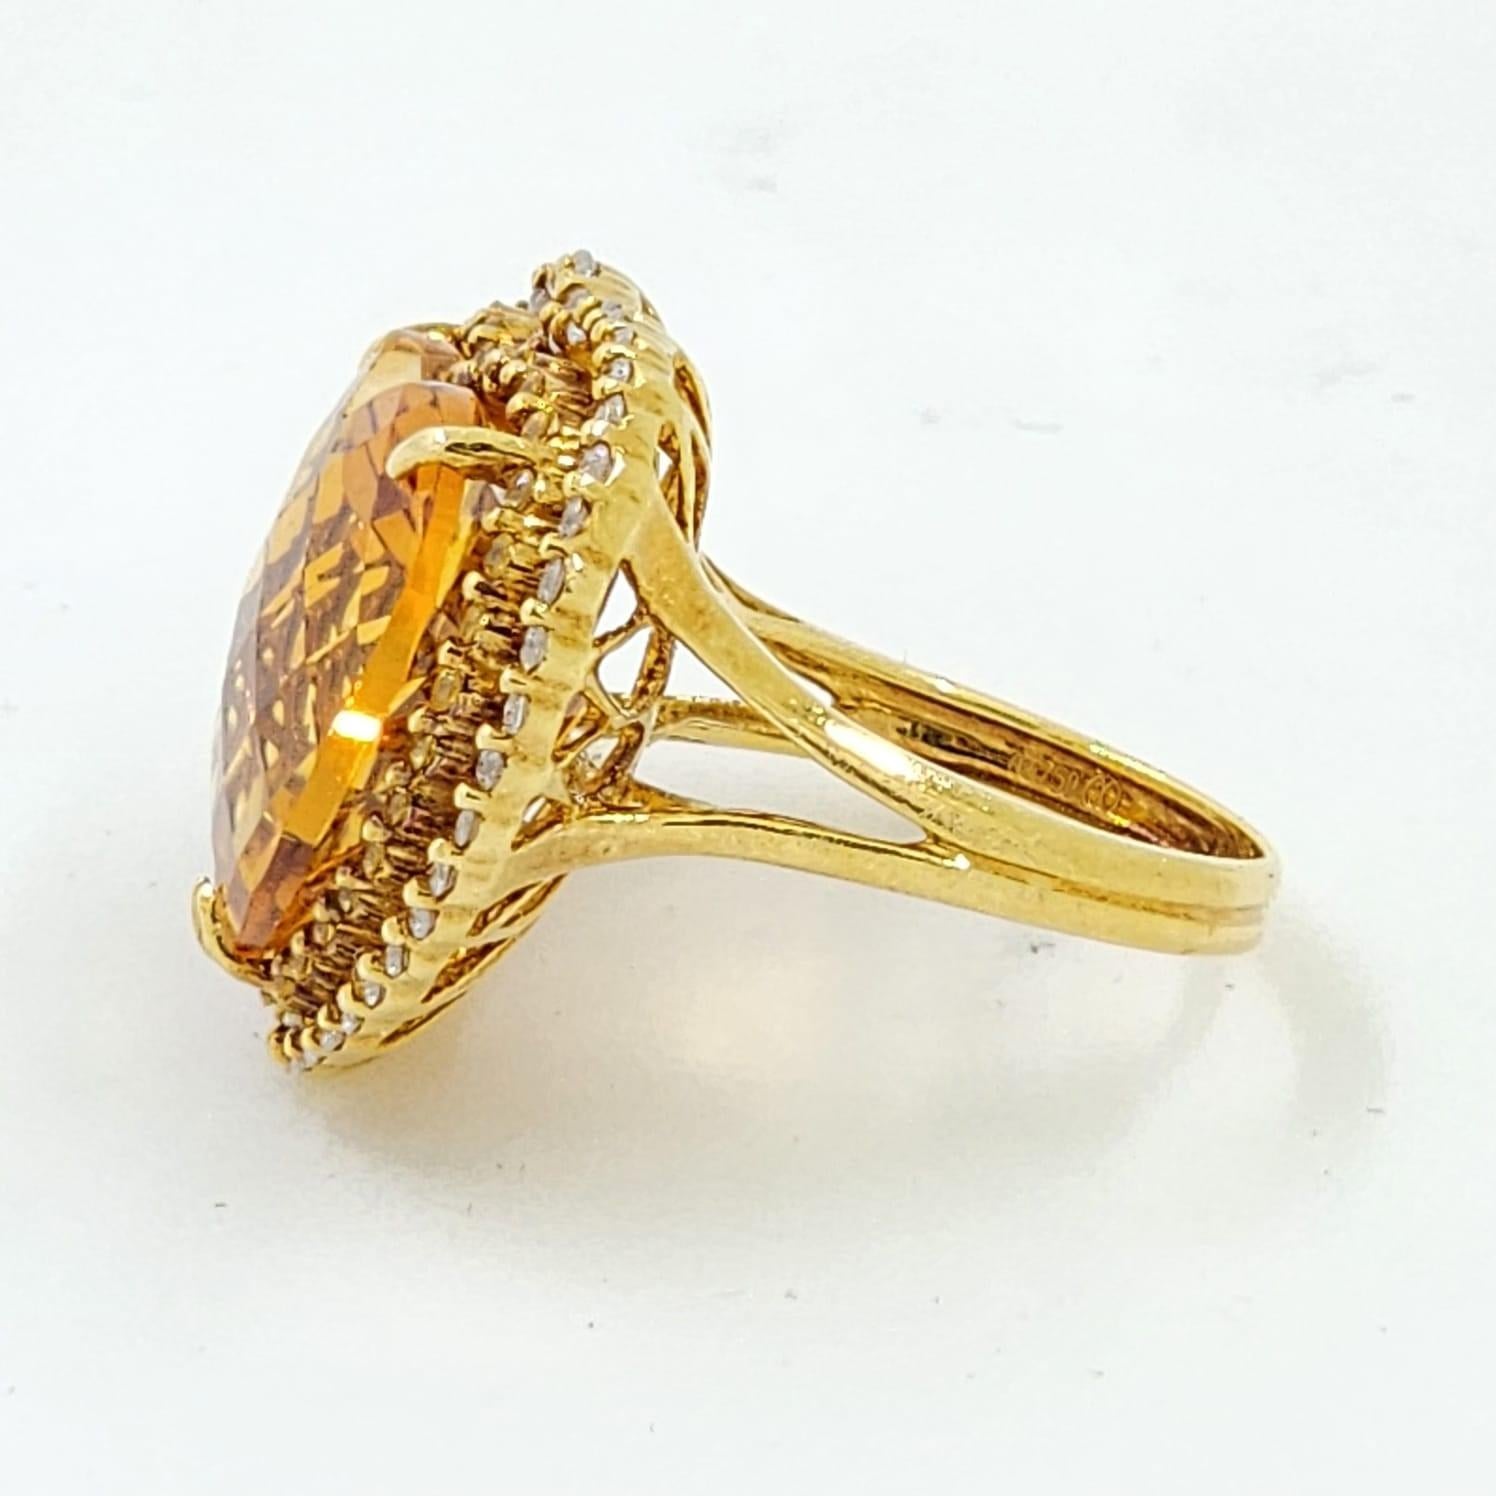 This stunning cocktail ring is a true statement of luxury and elegance. Crafted meticulously in 18 karat yellow gold, the ring is centered by a magnificent heart-cut citrine weighing 14.81 carats. This citrine is a gem of warmth and vibrancy, its